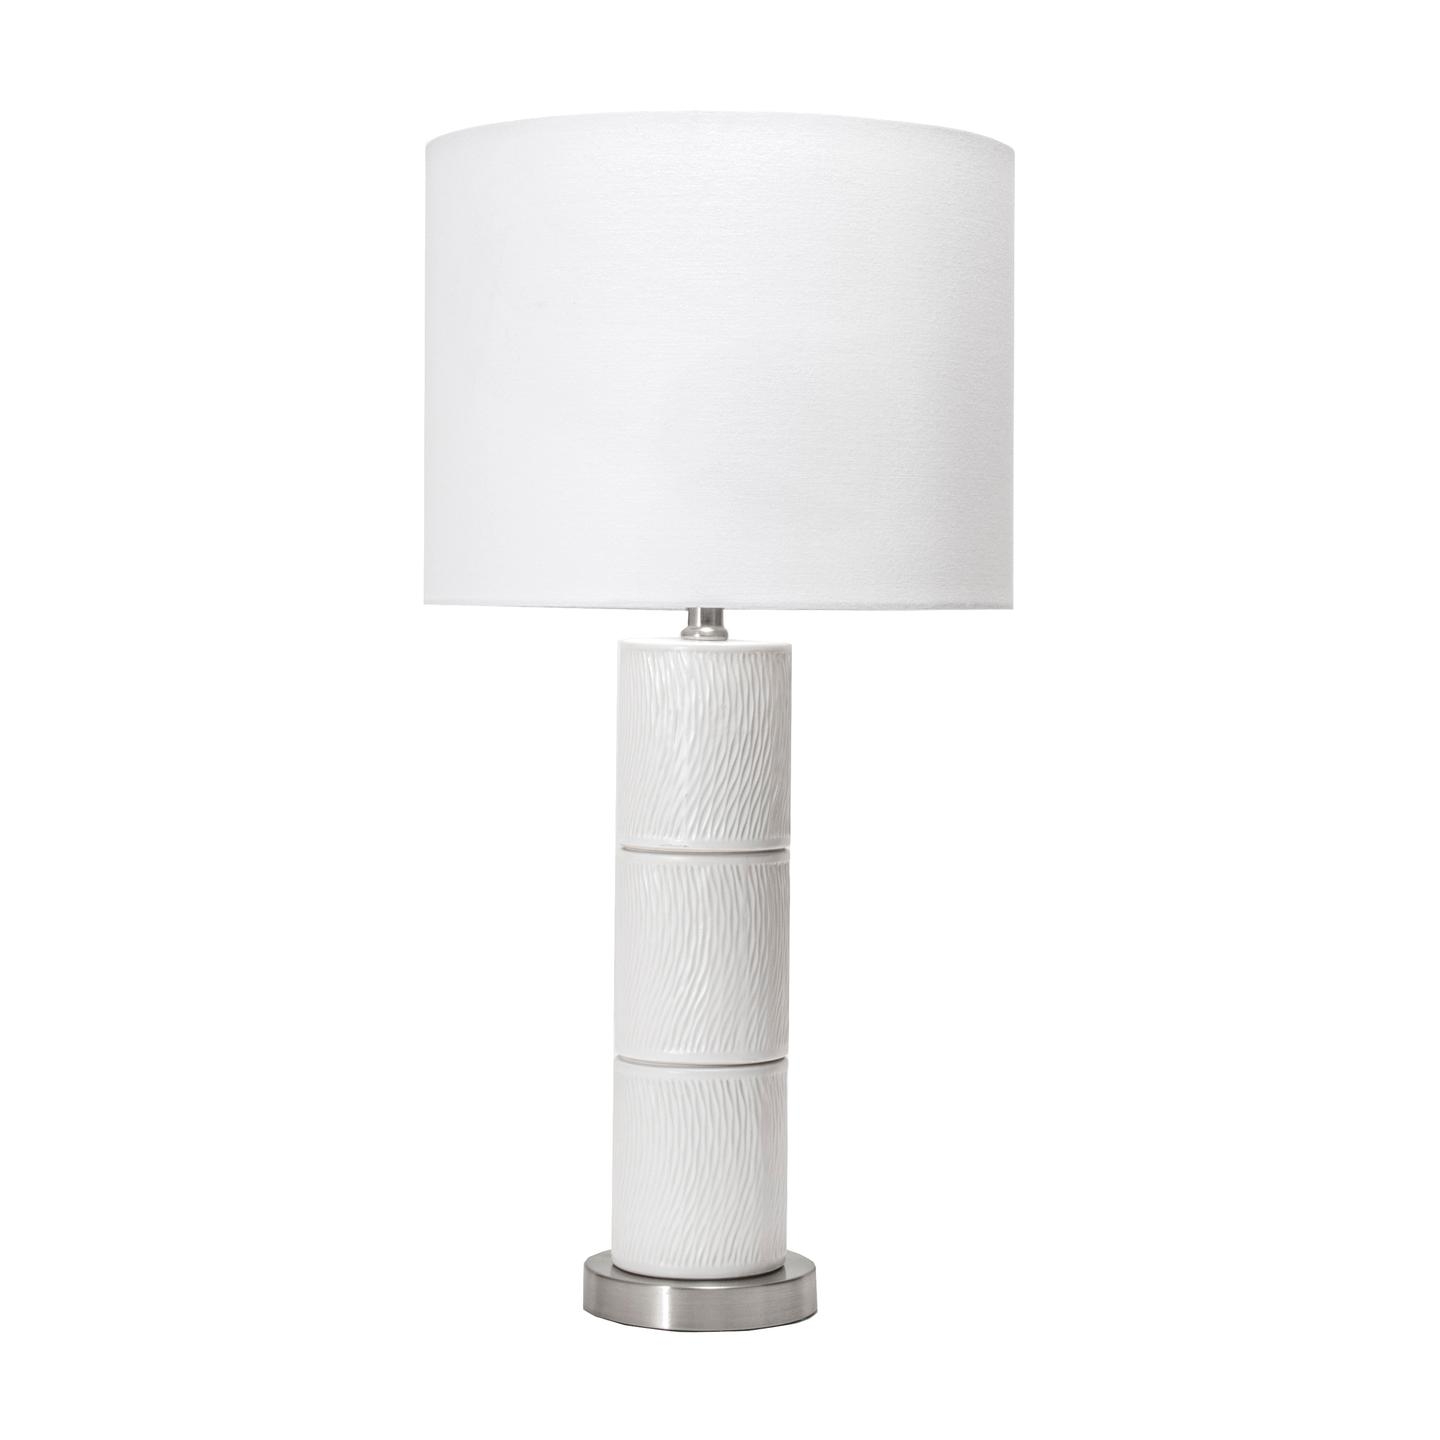 Searcy 26" Ceramic Table Lamp - Image 1